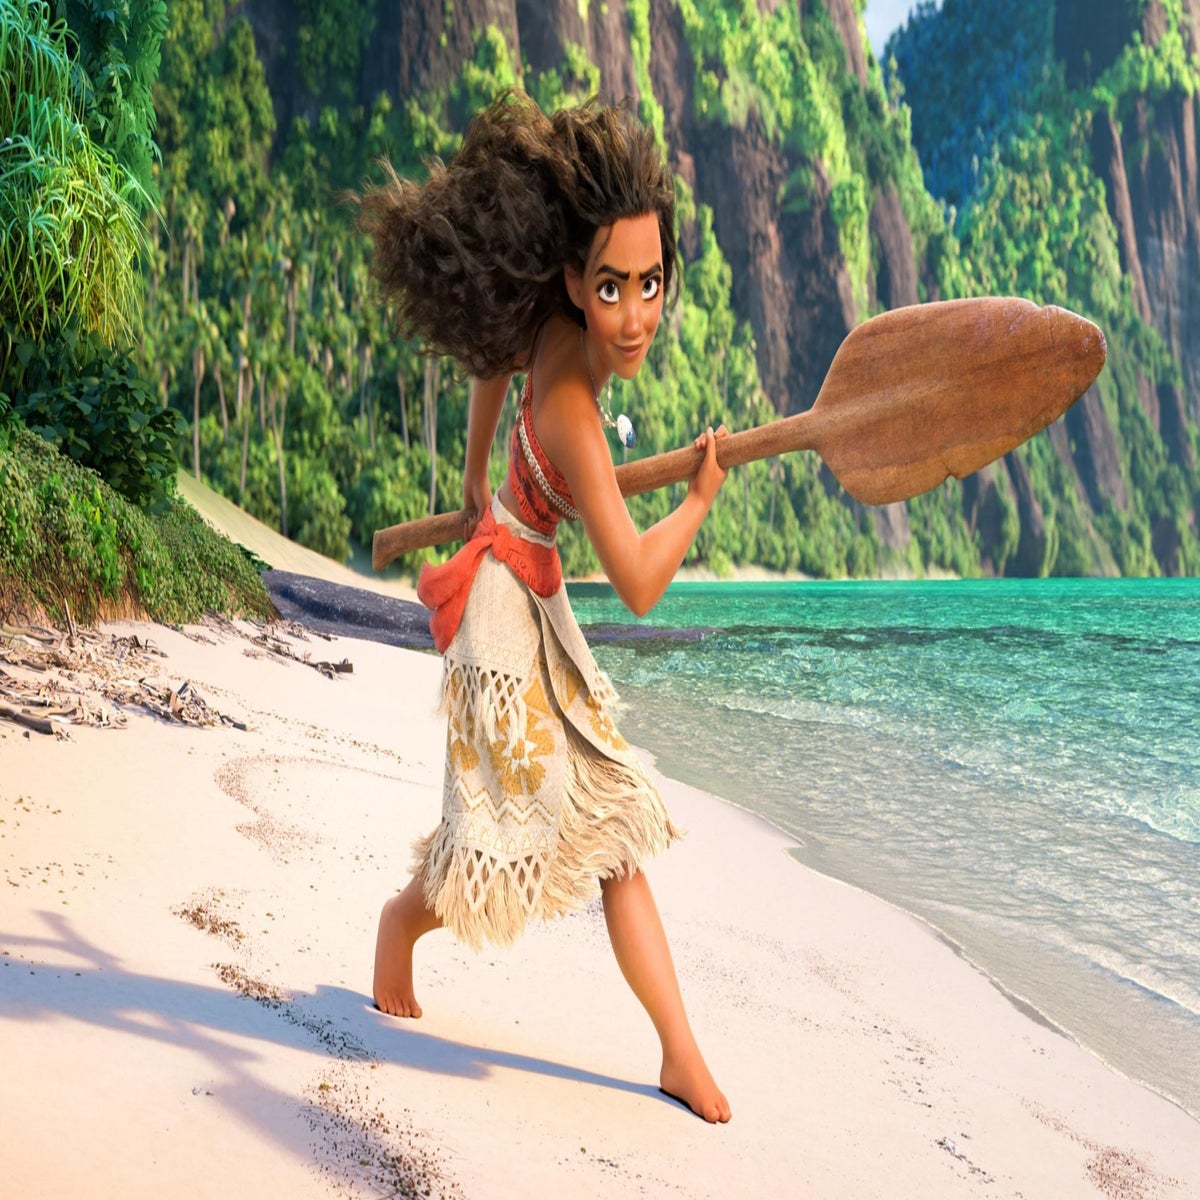 Disney's Moana: She is the epitome of the modern working woman